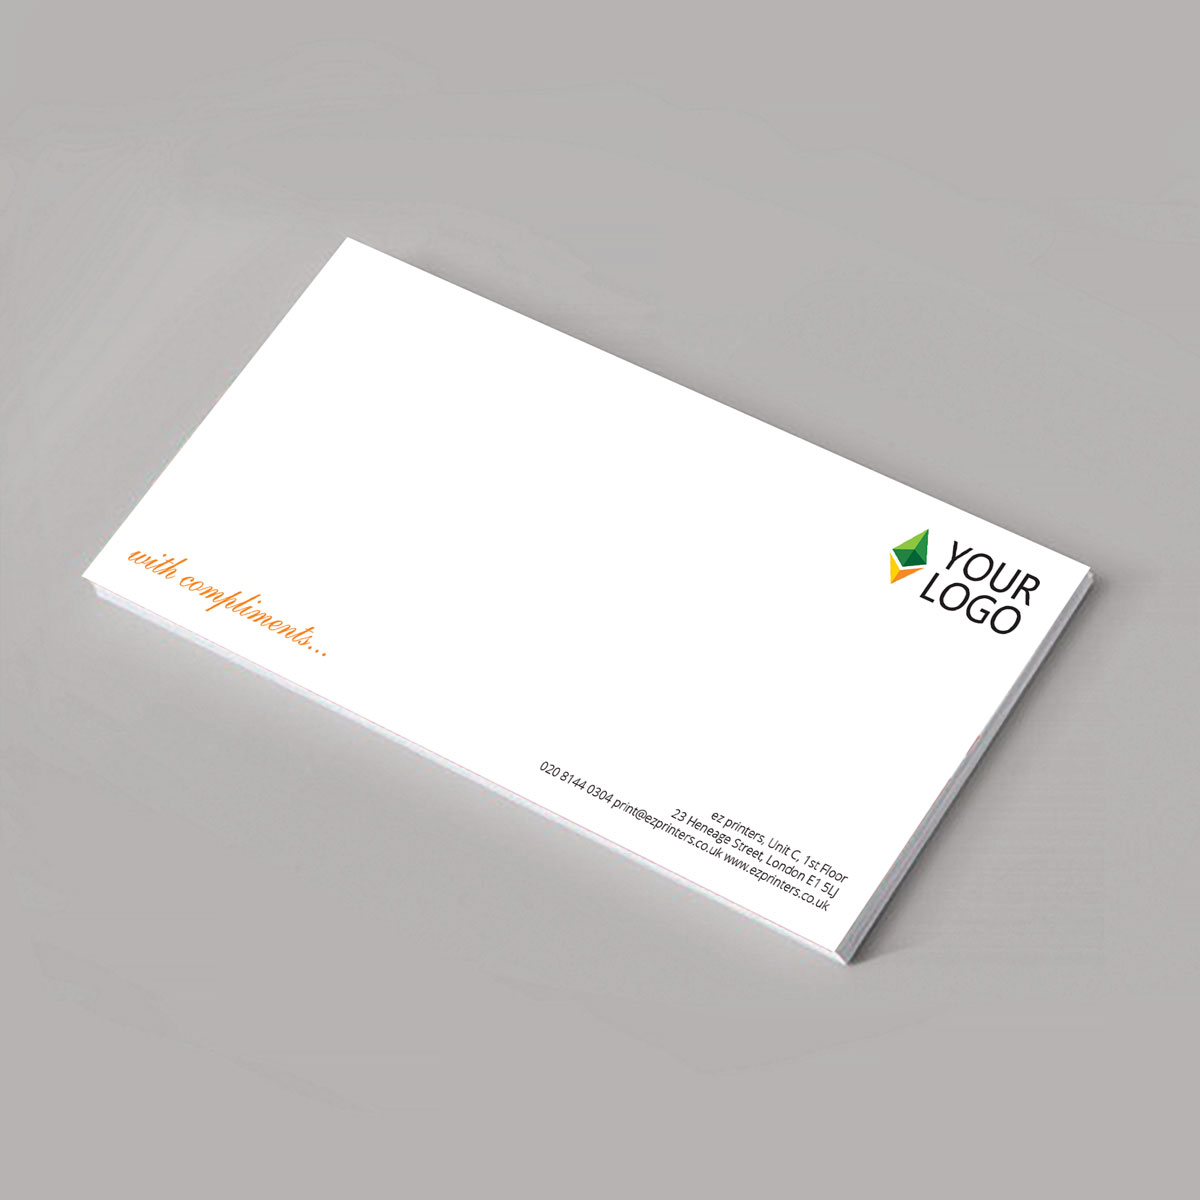 instant high quality compliment slips trade printer london ec3 near me